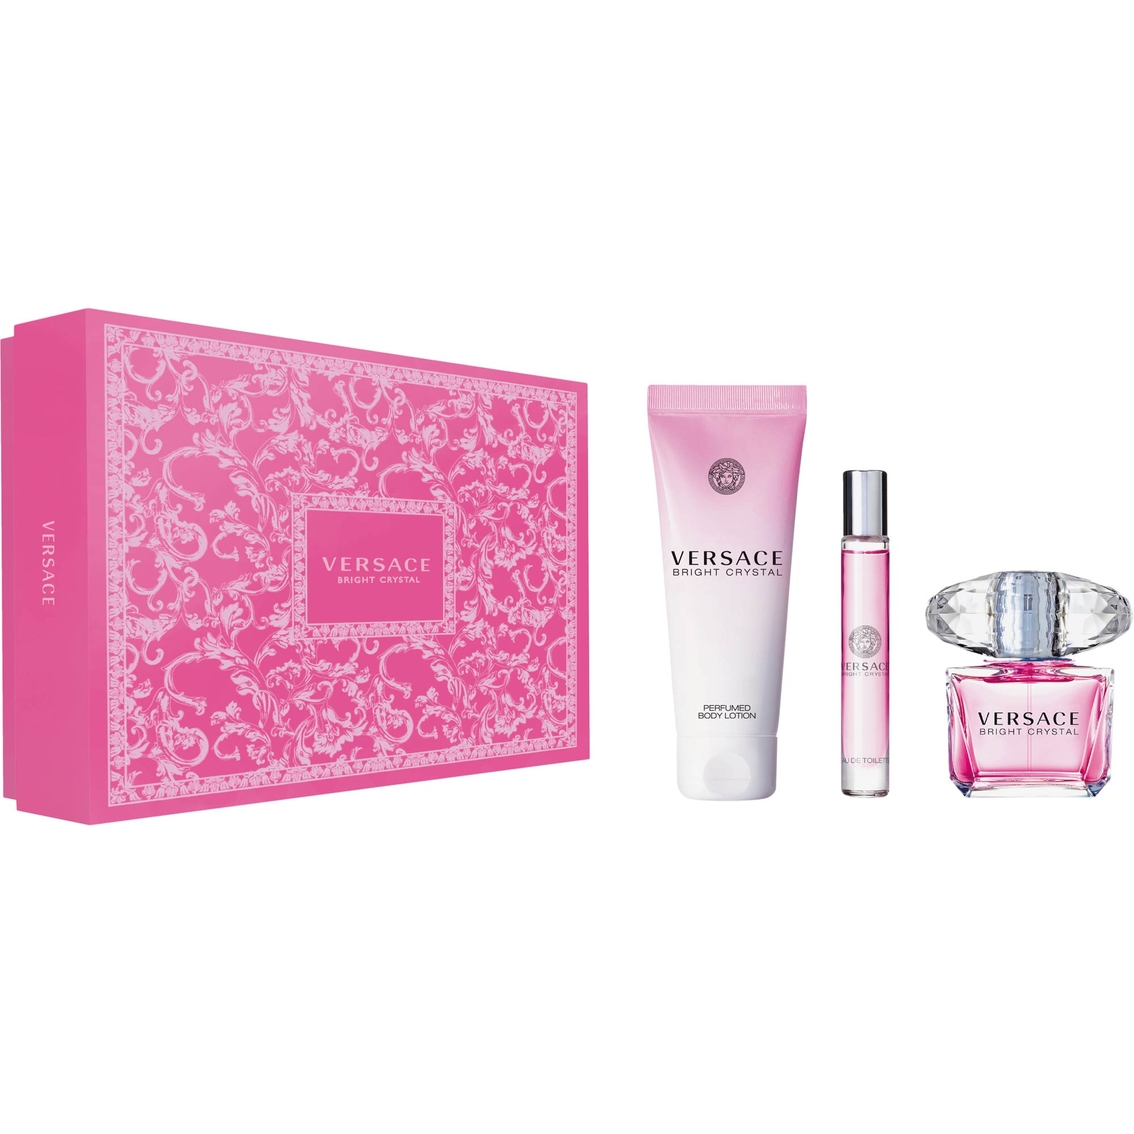 Versace Bright Crystal 3 Pc. Set | Gifts Sets For Her | Beauty & Health ...